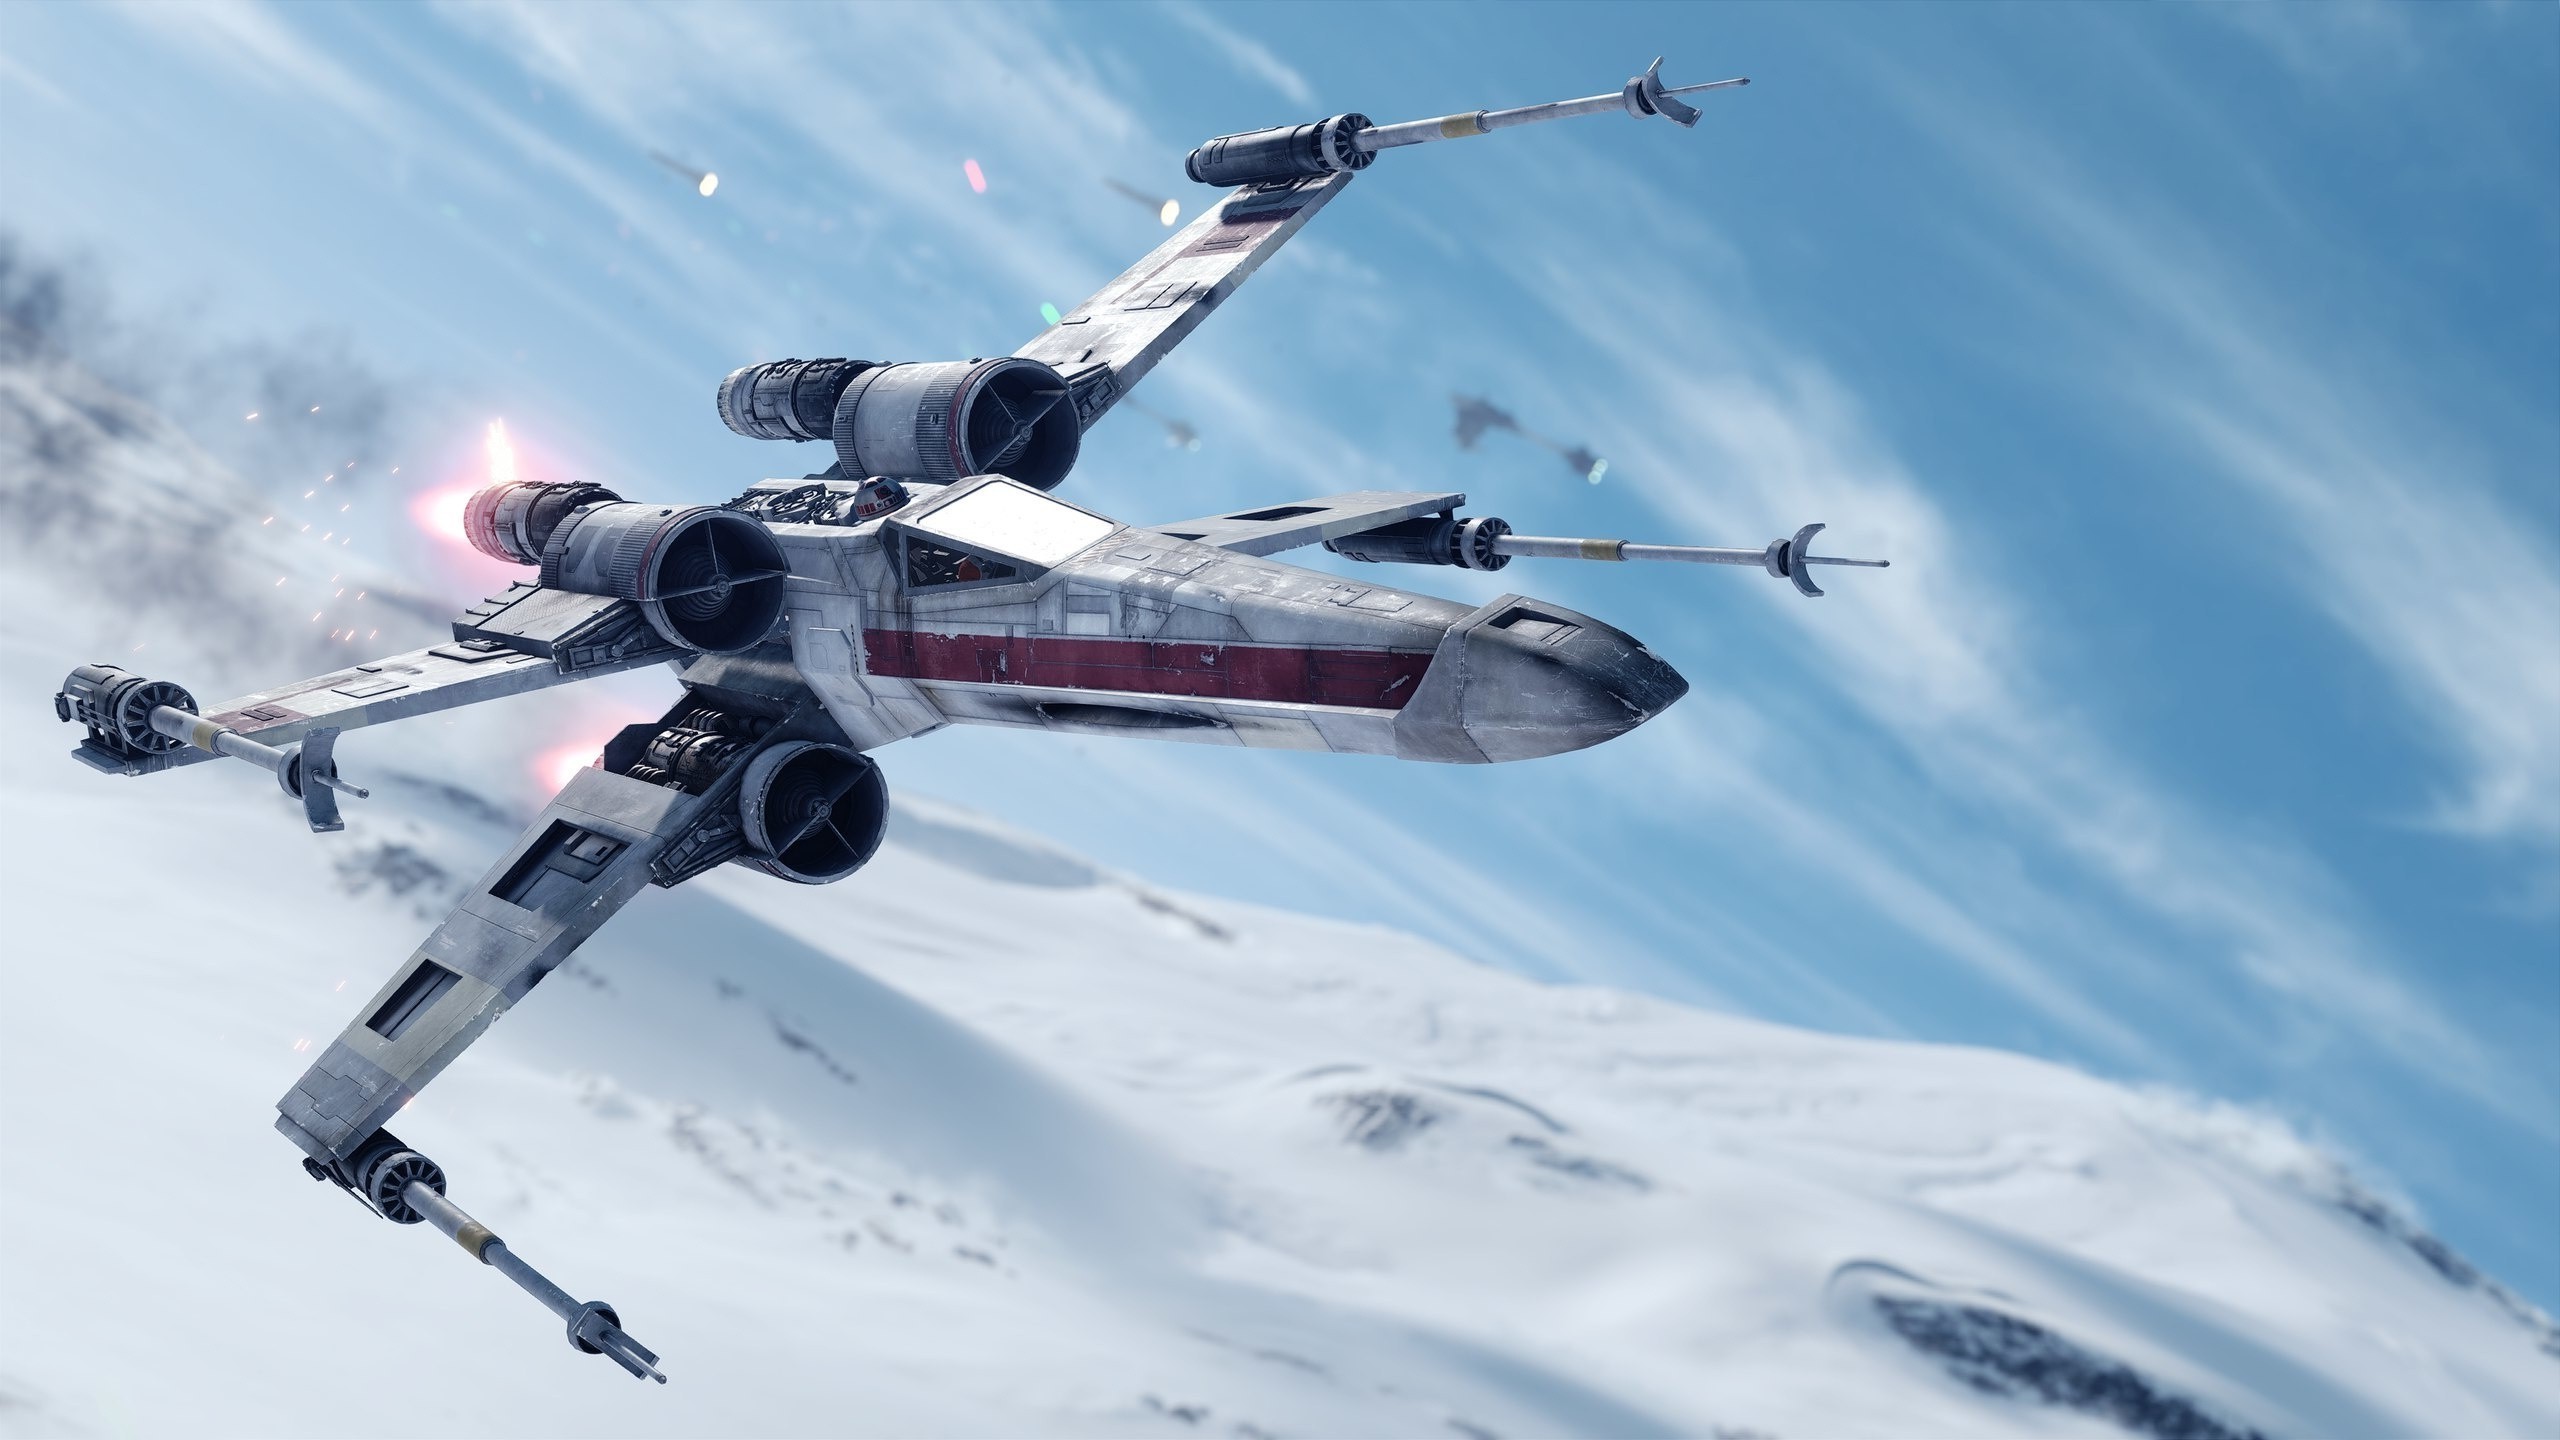 star wars x wing wallpaper,snow,vehicle,technology,space,winter